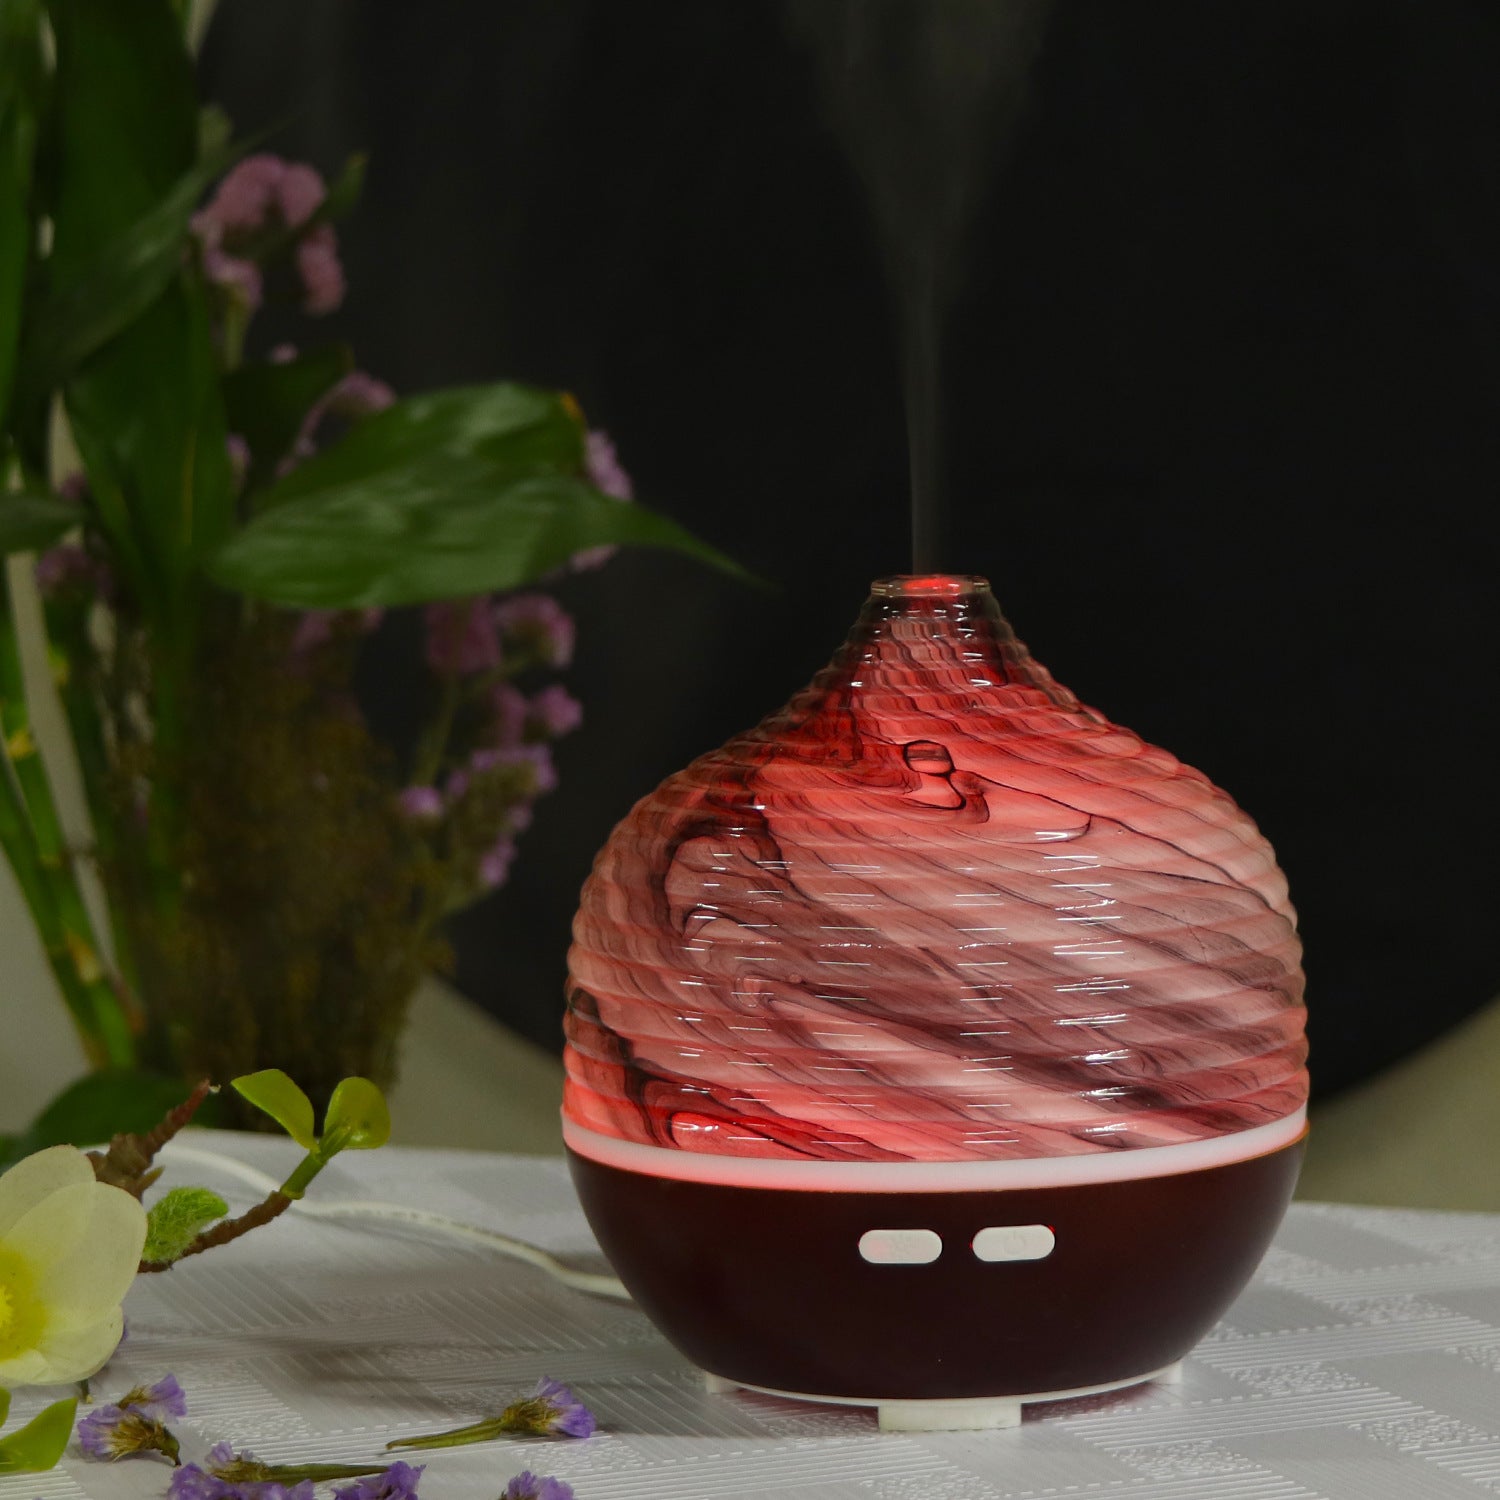 Luxurious Wooden Humidifier